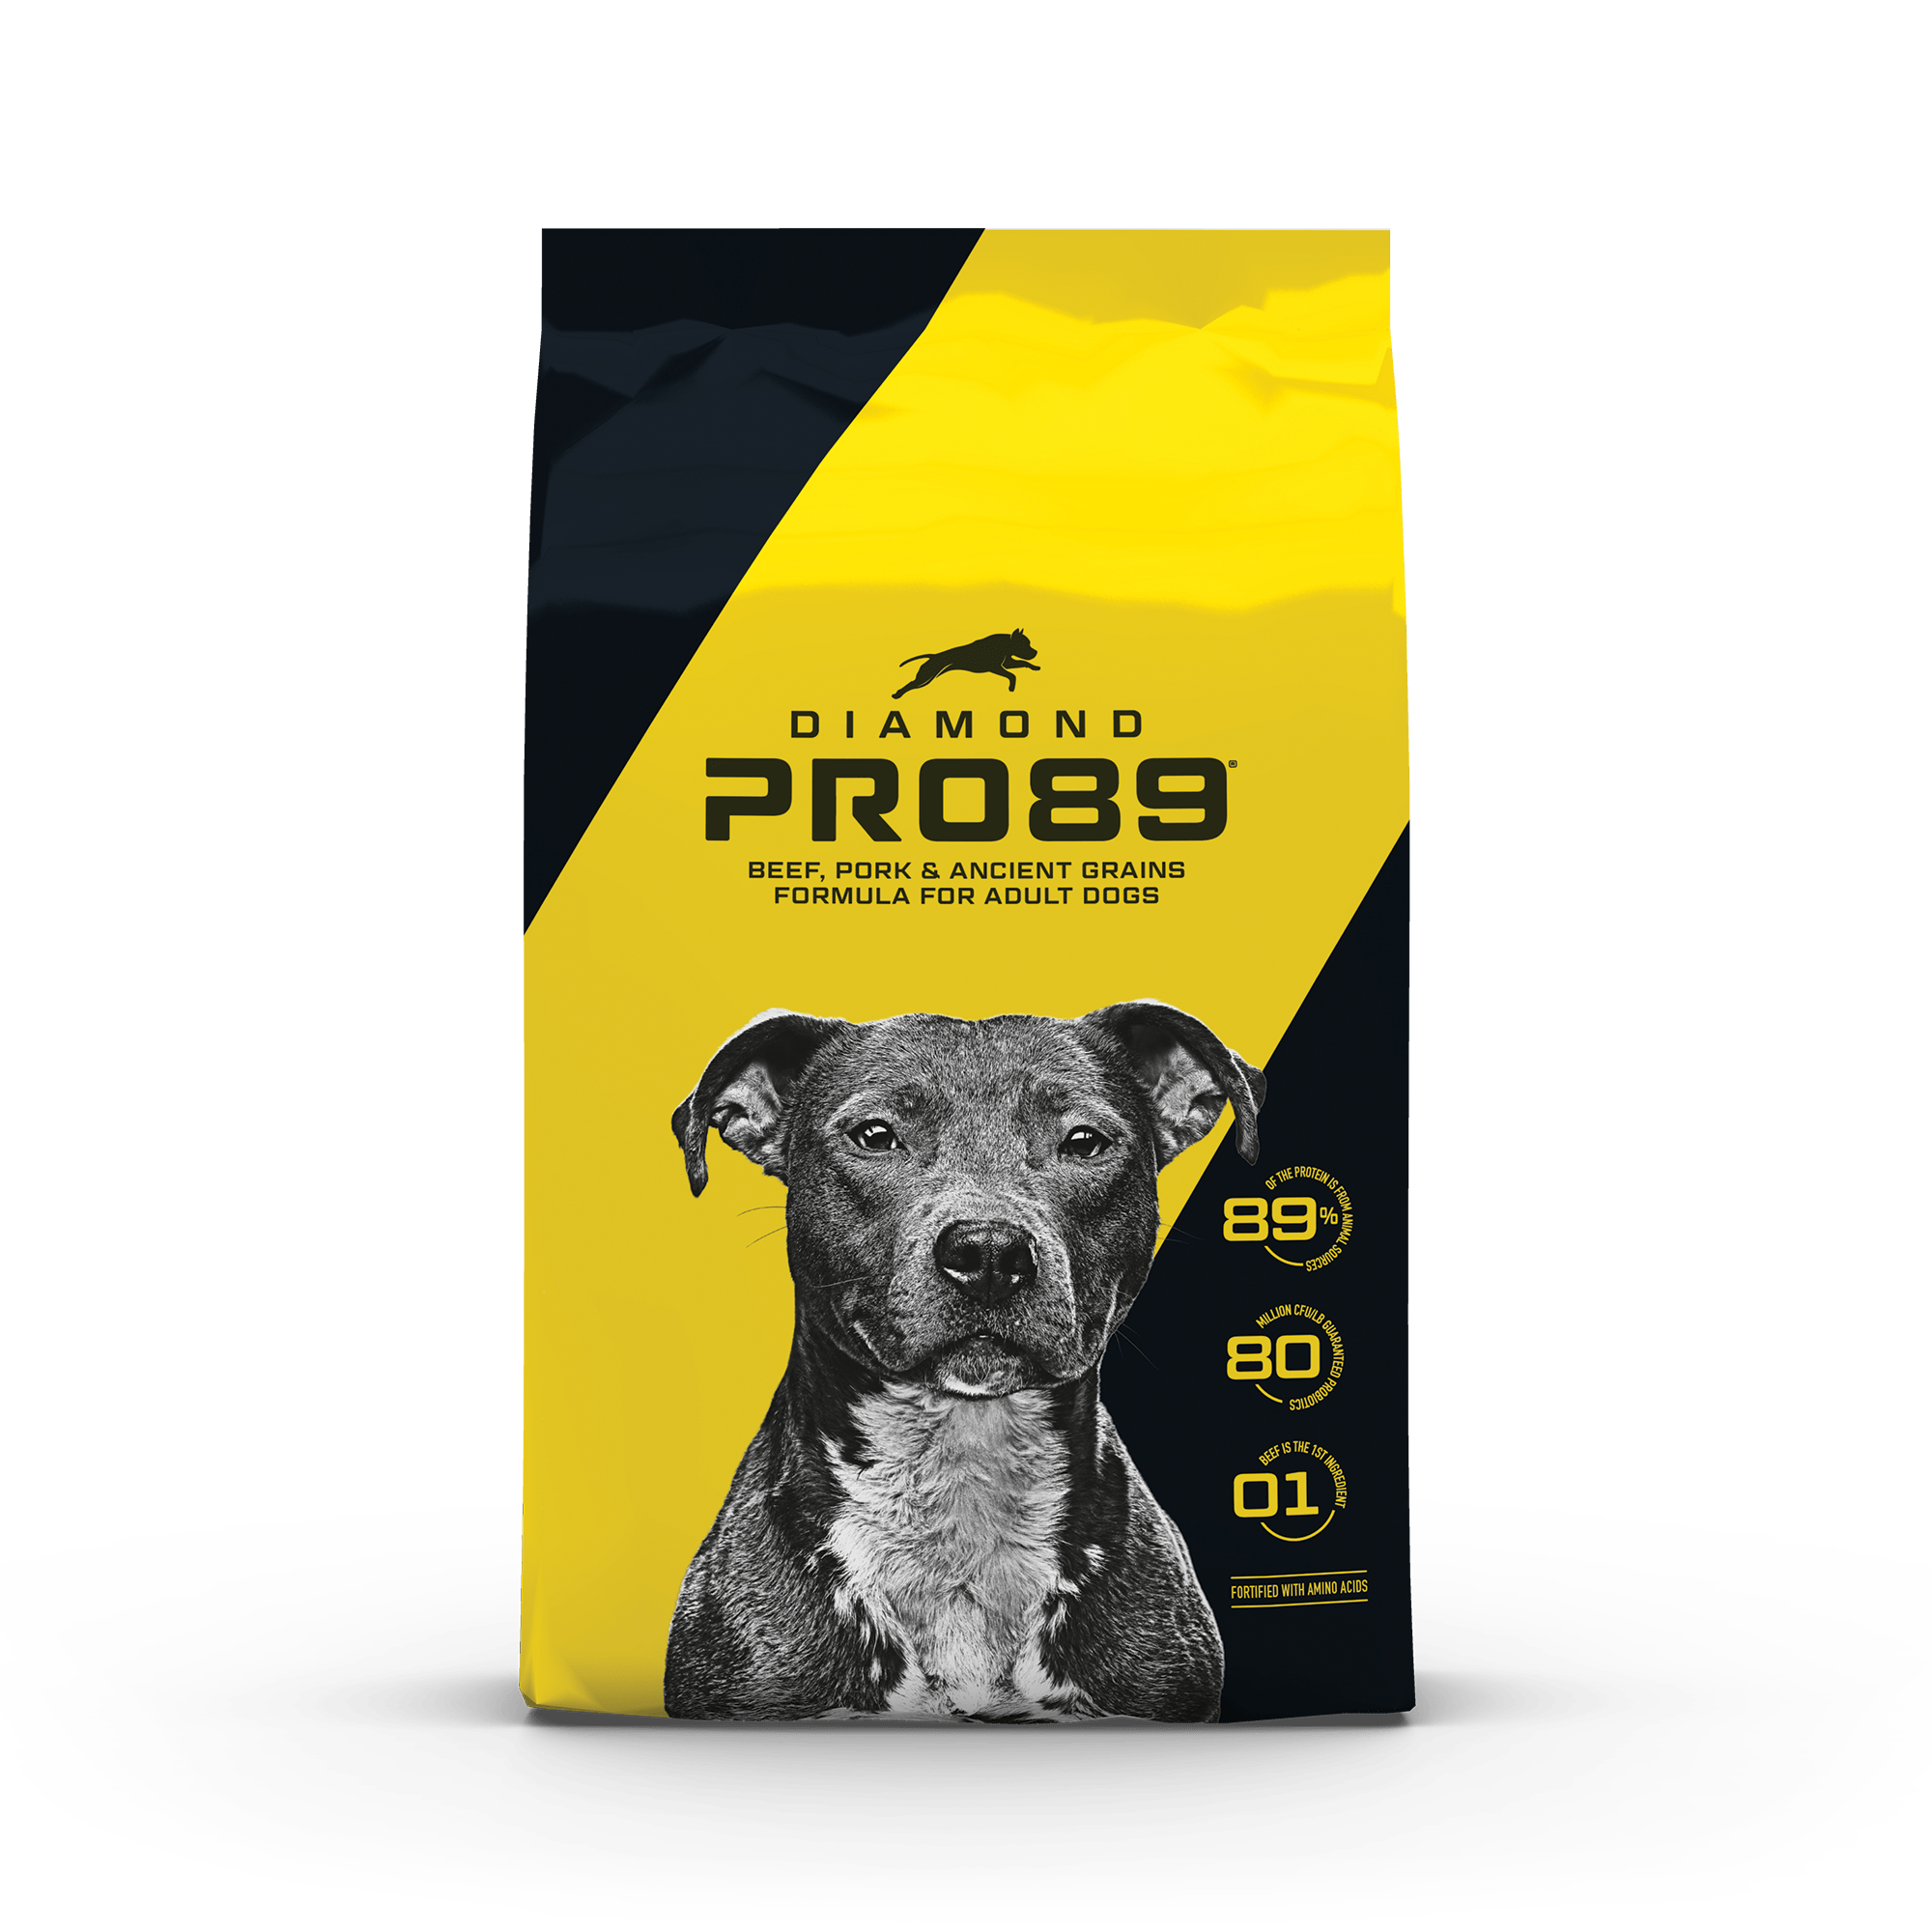 Diamond Pro89 Beef, Pork & Ancient Grains Formula for Adult Dogs product packaging